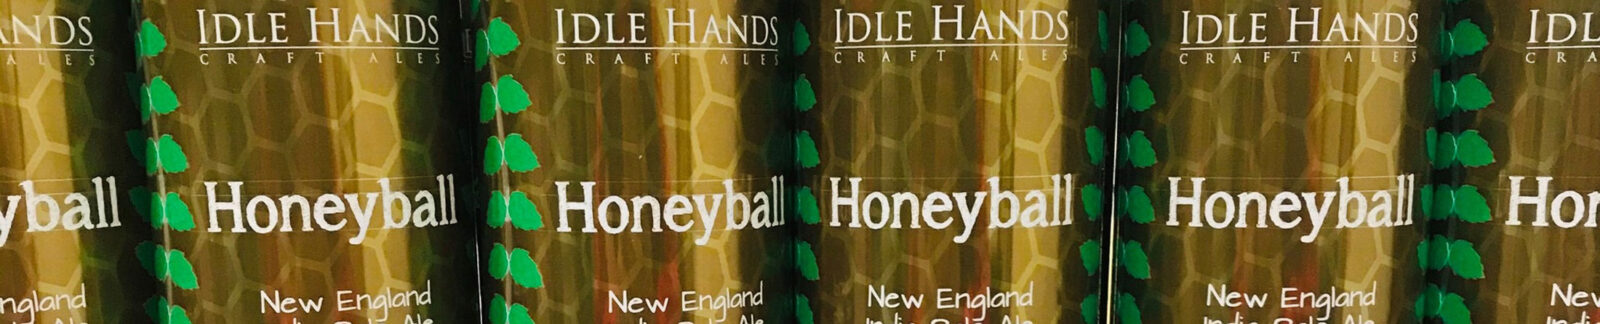 Honeyball IPA by Idle Hands Brewery